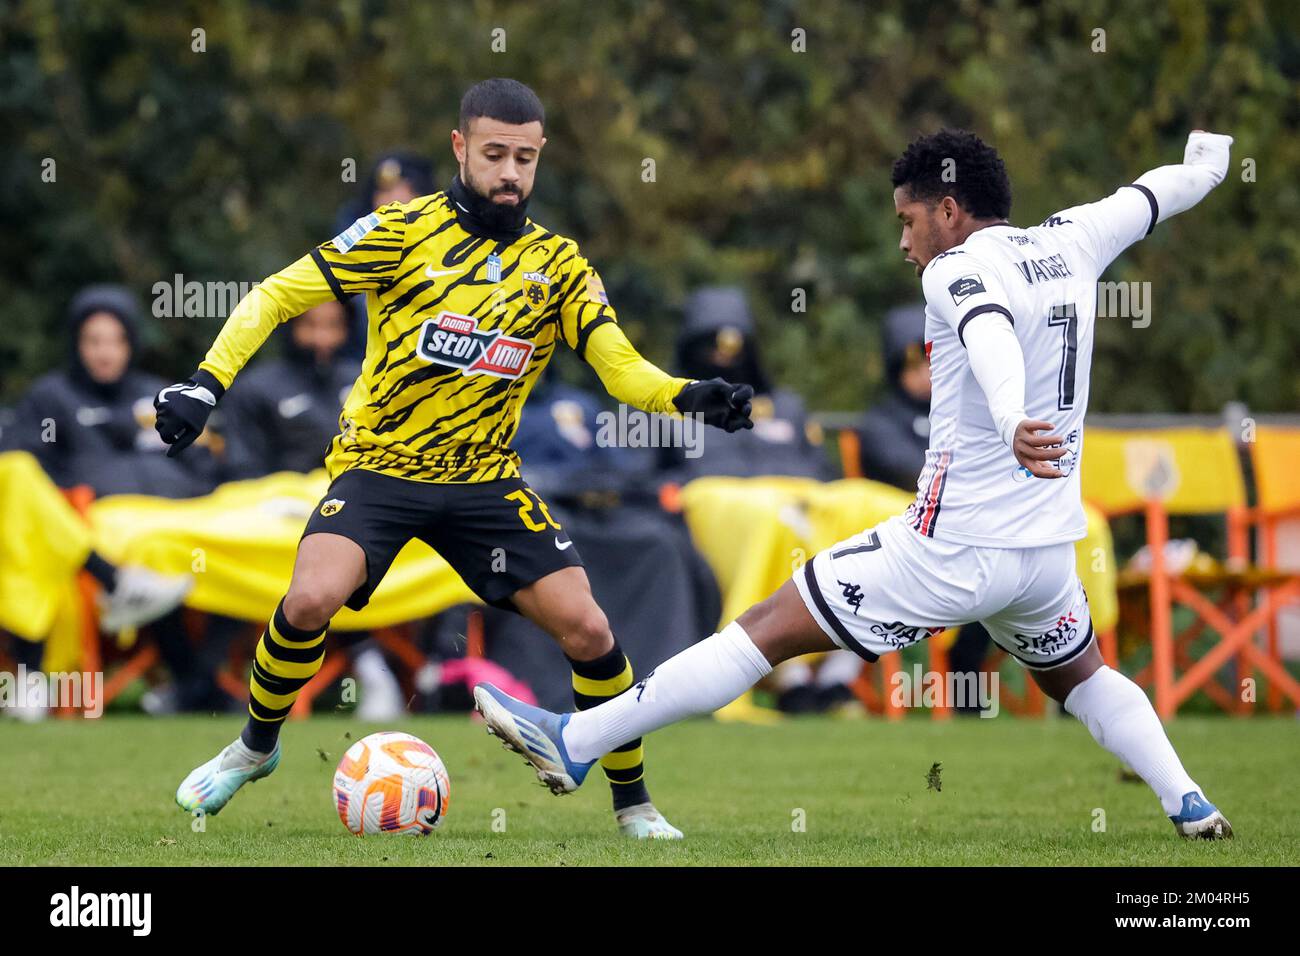 BURGH-HAAMSTEDE, NETHERLANDS - DECEMBER 4: Paolo Fernandes of AEK Athens dribbles with the ball during the Friendly match between AEK Athens and RFC Seraing at Sportpark van Zuijen on December 4, 2022 in Burgh-Haamstede, Netherlands (Photo by Broer van den Boom/Orange Pictures) Stock Photo